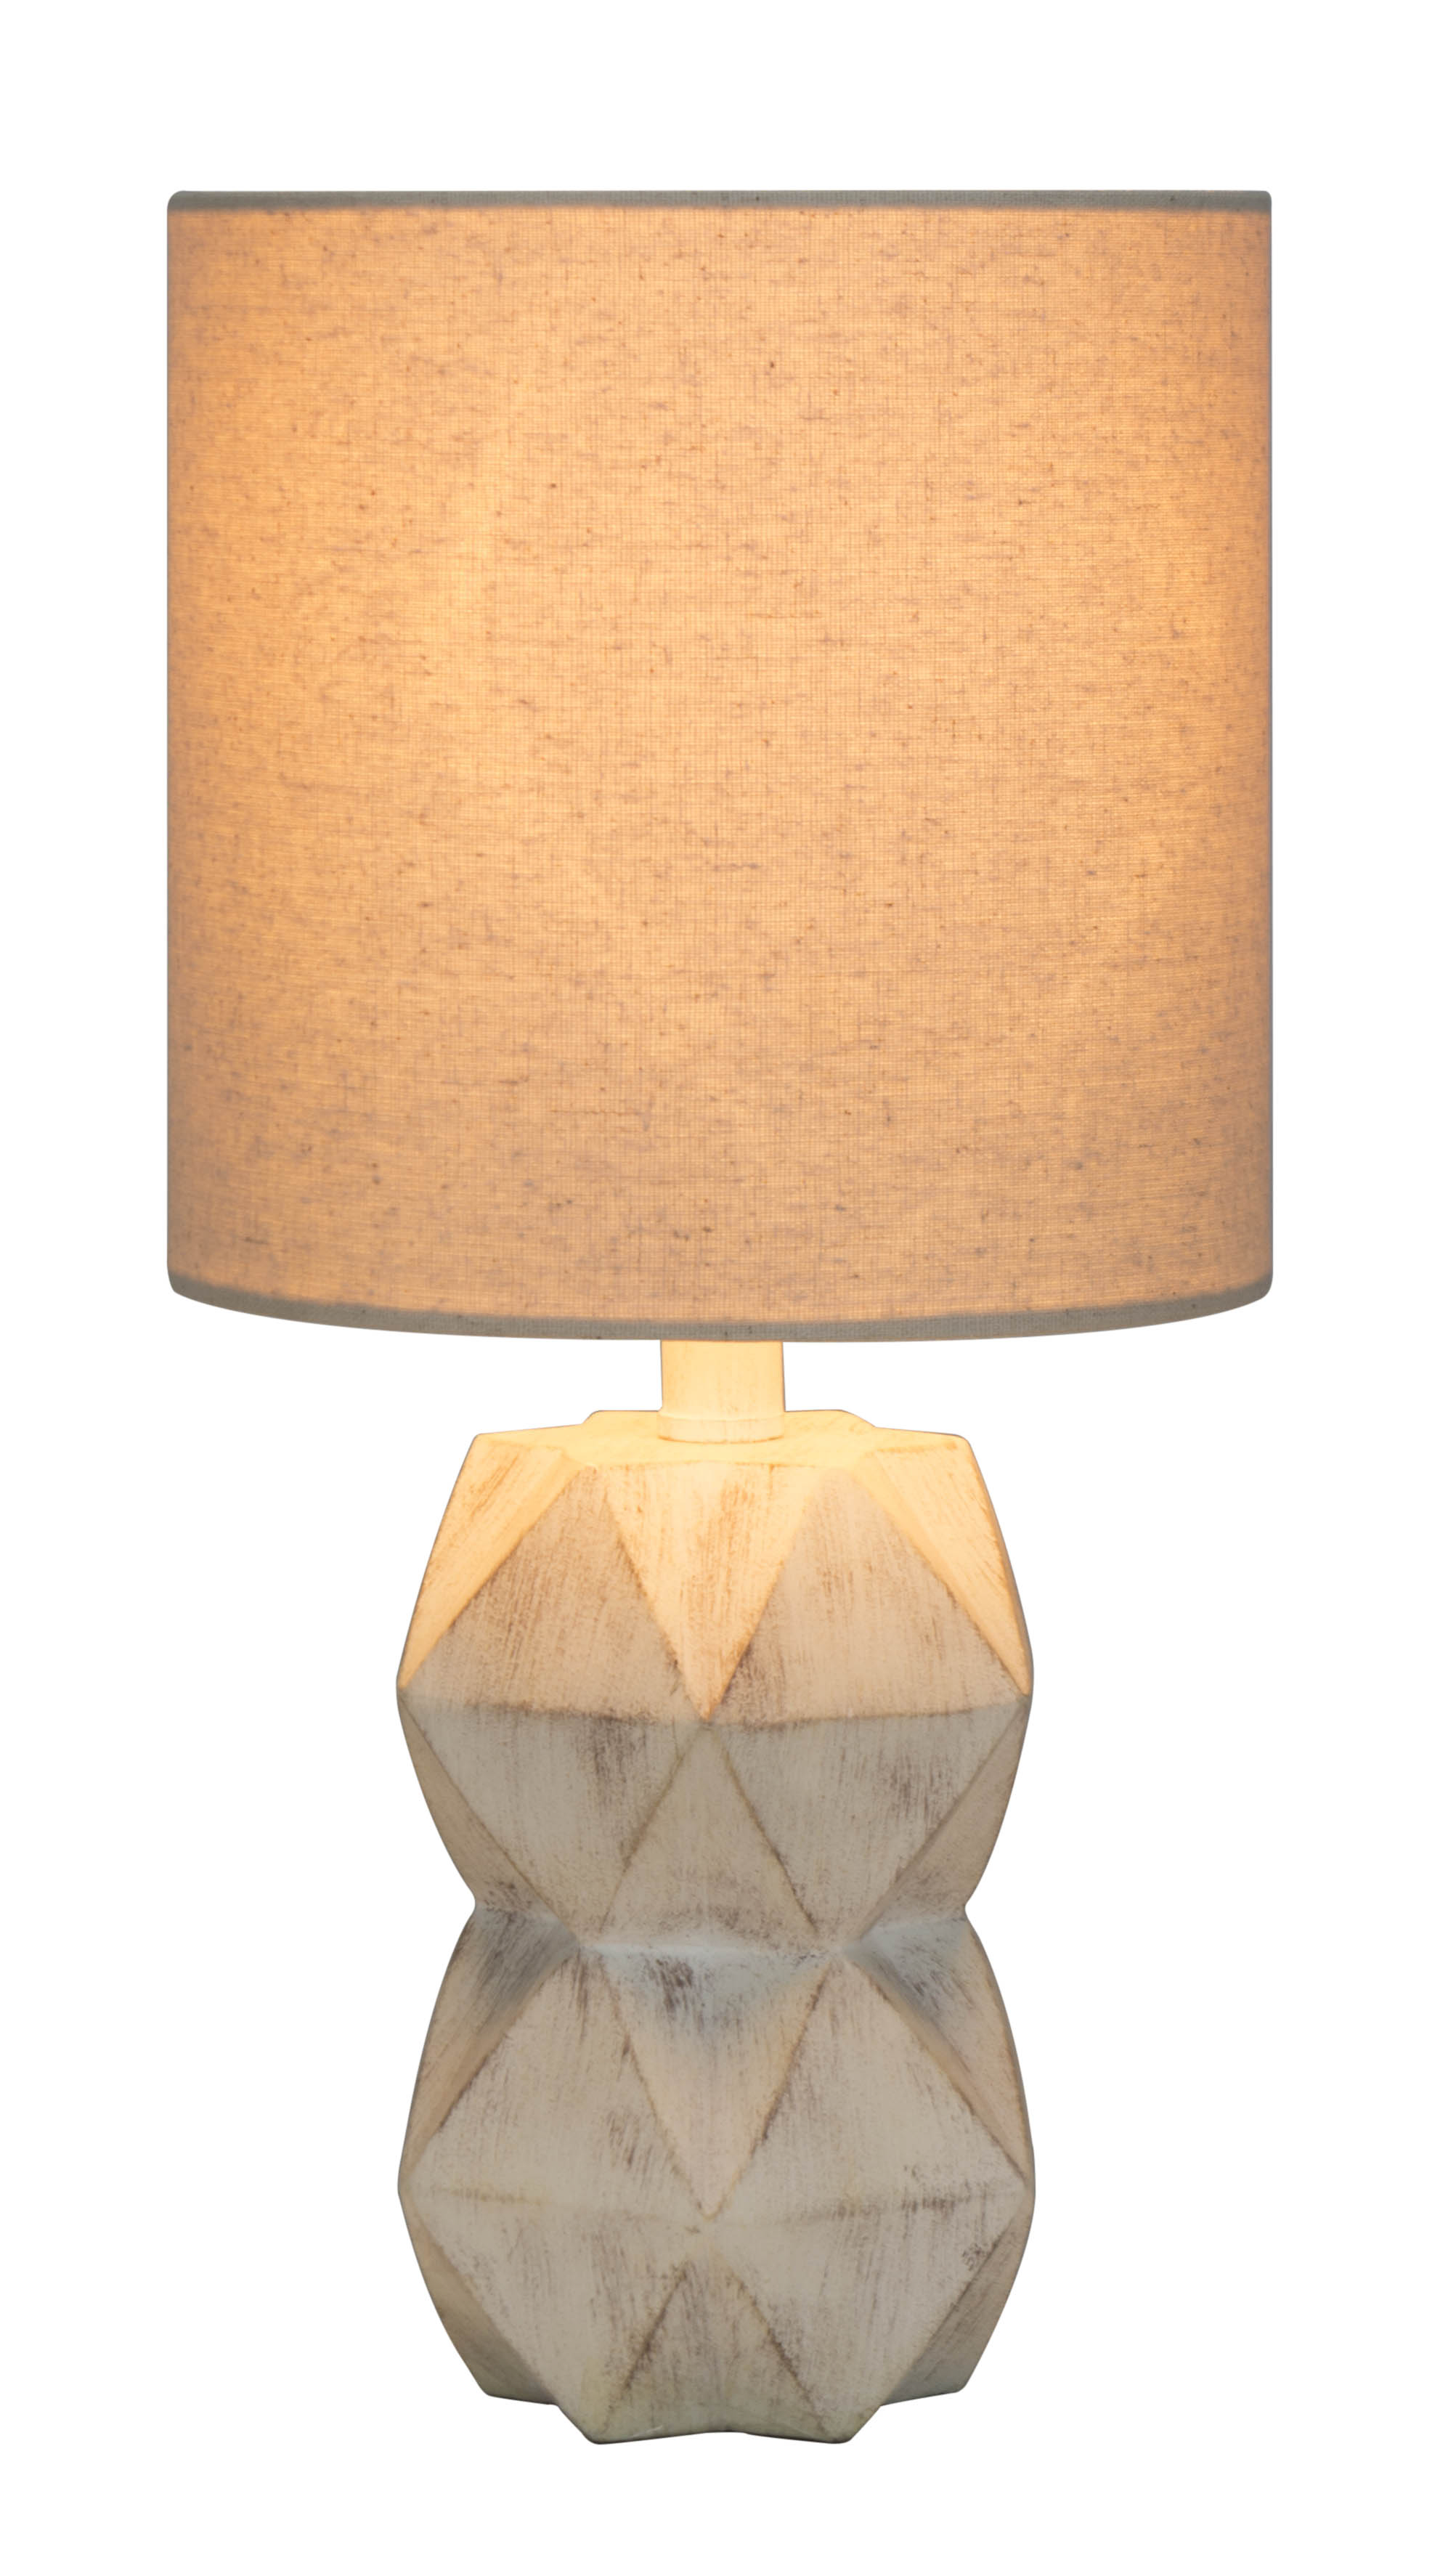 Better Homes & Gardens White Wash Faceted Faux Wood Table Lamp - image 4 of 10